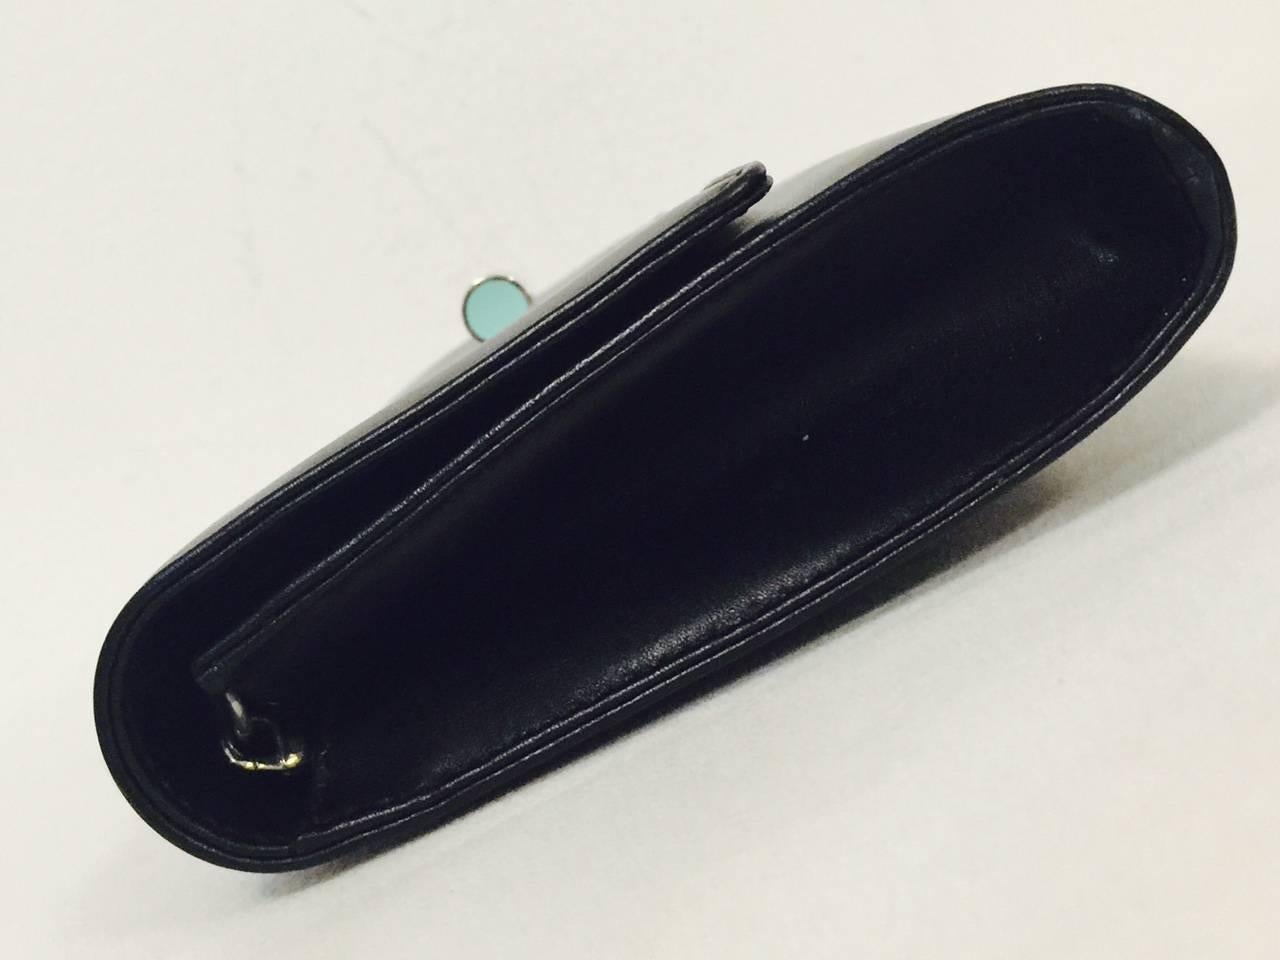 Tiffany & Co. Black Polished Calfskin Large City Clutch Above Excellent  2